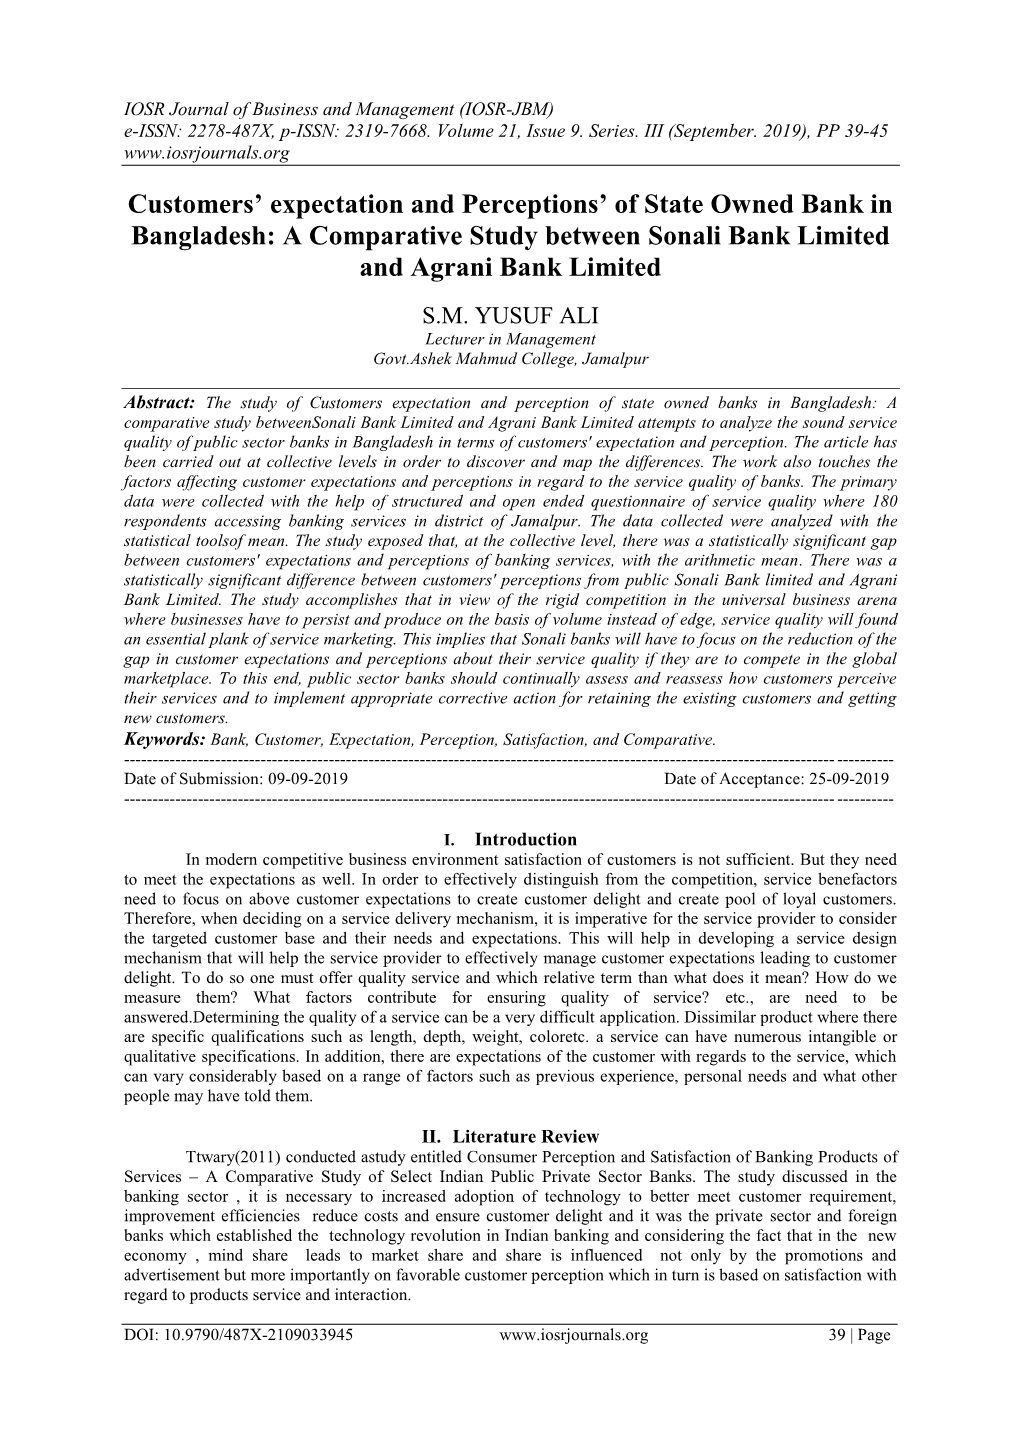 A Comparative Study Between Sonali Bank Limited and Agrani Bank Limited